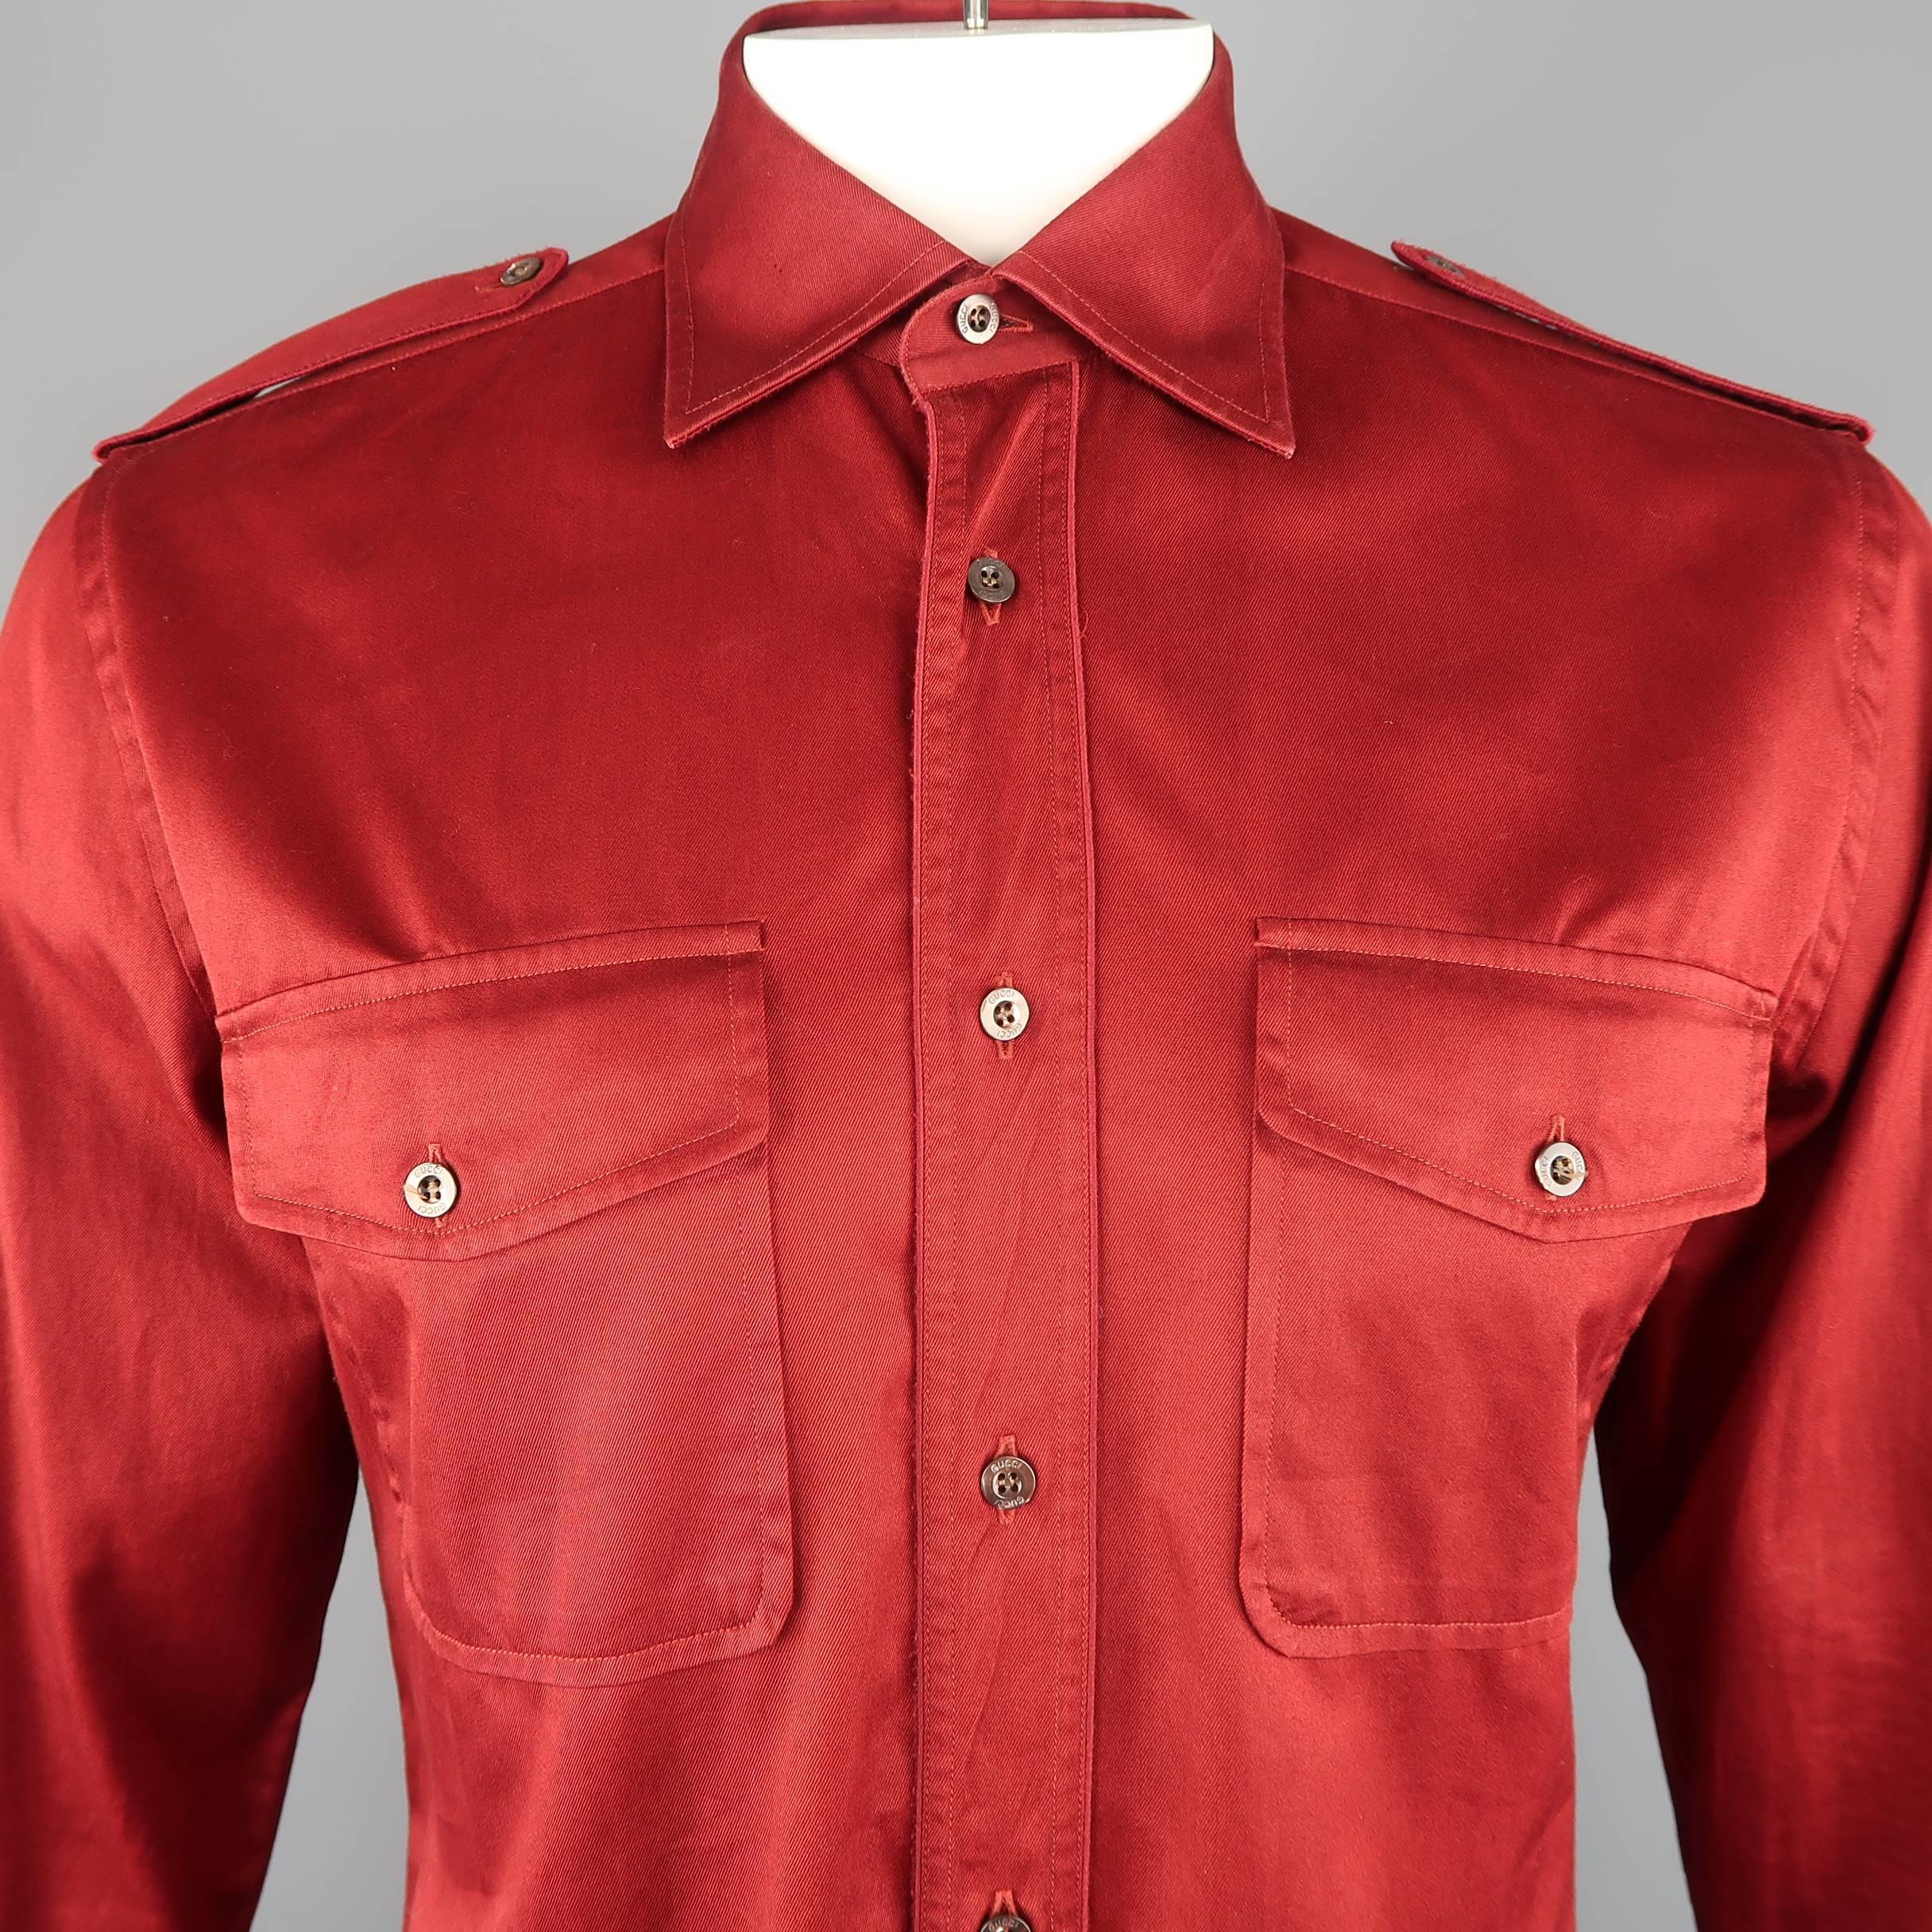 GUCCI military style comes in burgundy red cotton twill with a pointed spread collar, epaulets, patch flap pockets, and satin piping throughout. Made in Italy.
 
Good Pre-Owned Condition.
Marked: 41  16
 
Measurements:
 
Shoulder: 18 in.
Chest: 42